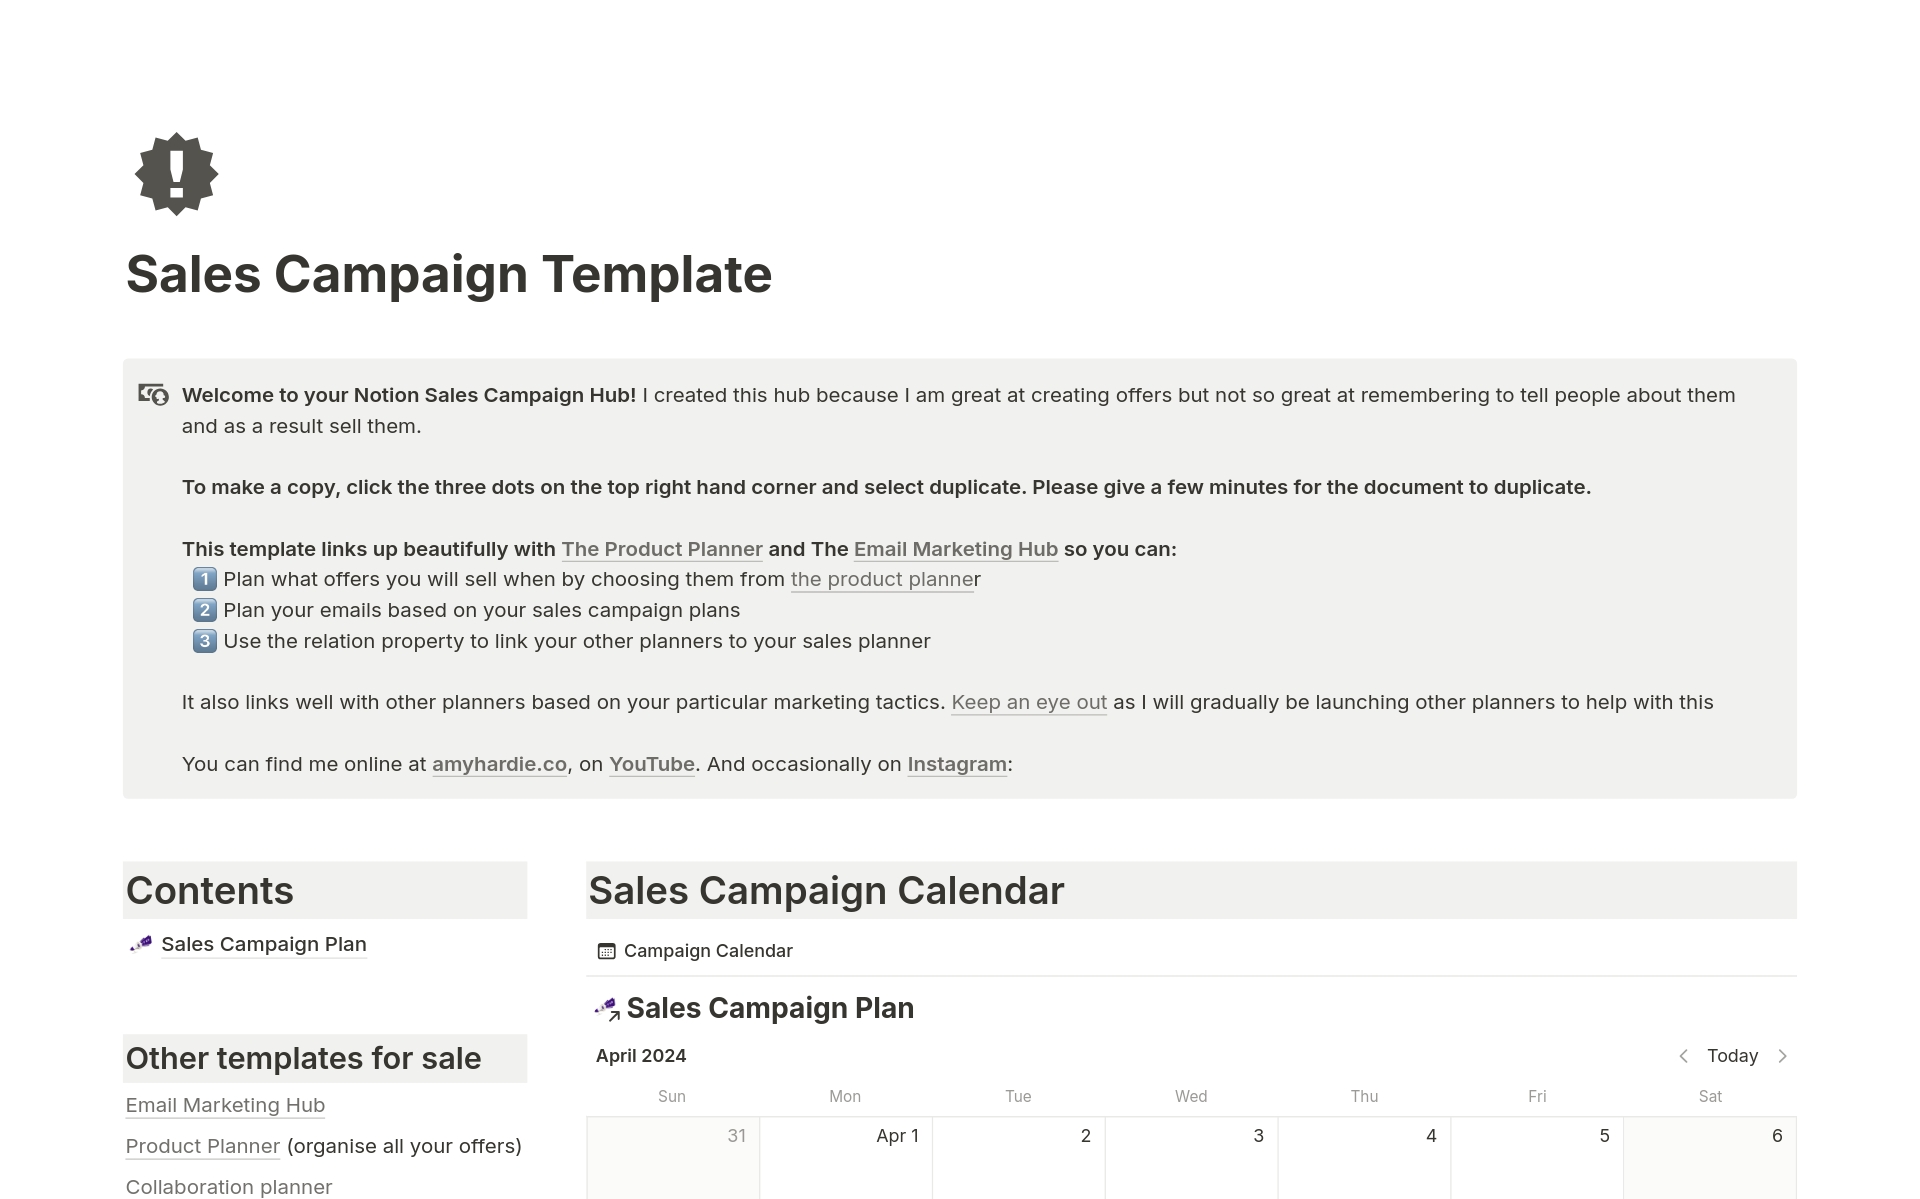 This template allows online business owners to plan out their business focus calendar.